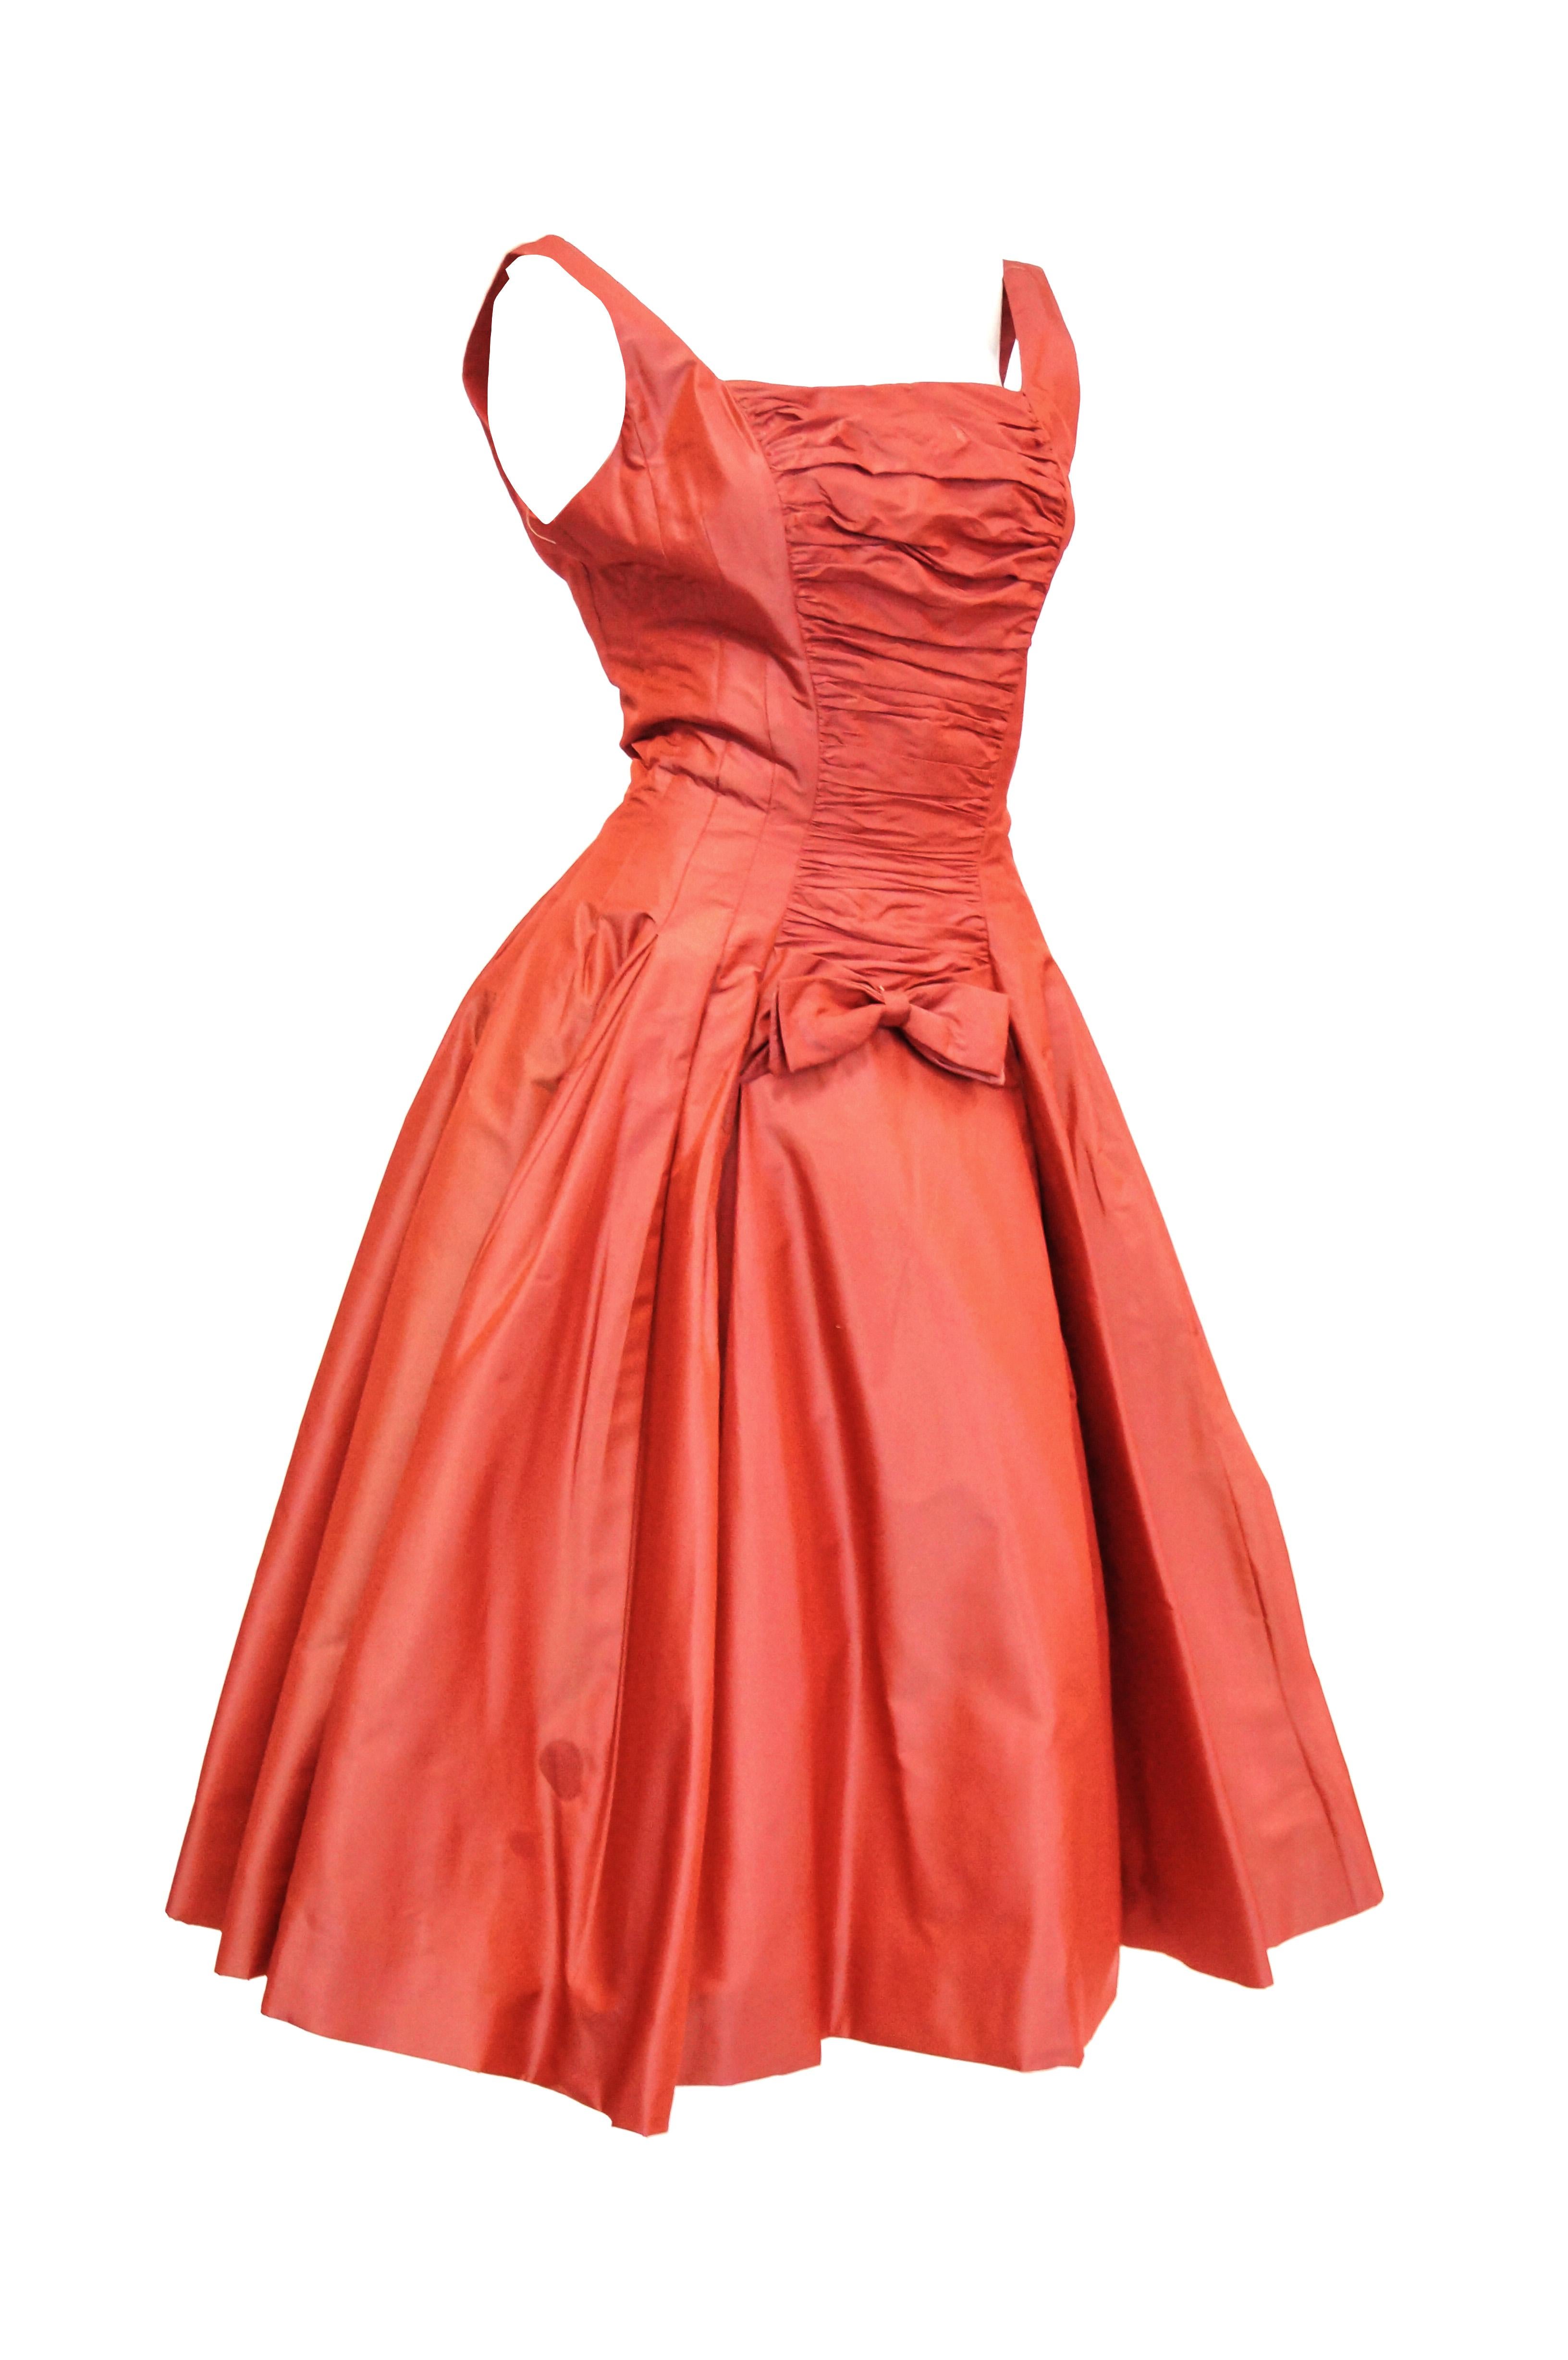 1950s Suzy Perette Red Charmeuse Satin New Look Evening Dress with Bow Detail 1